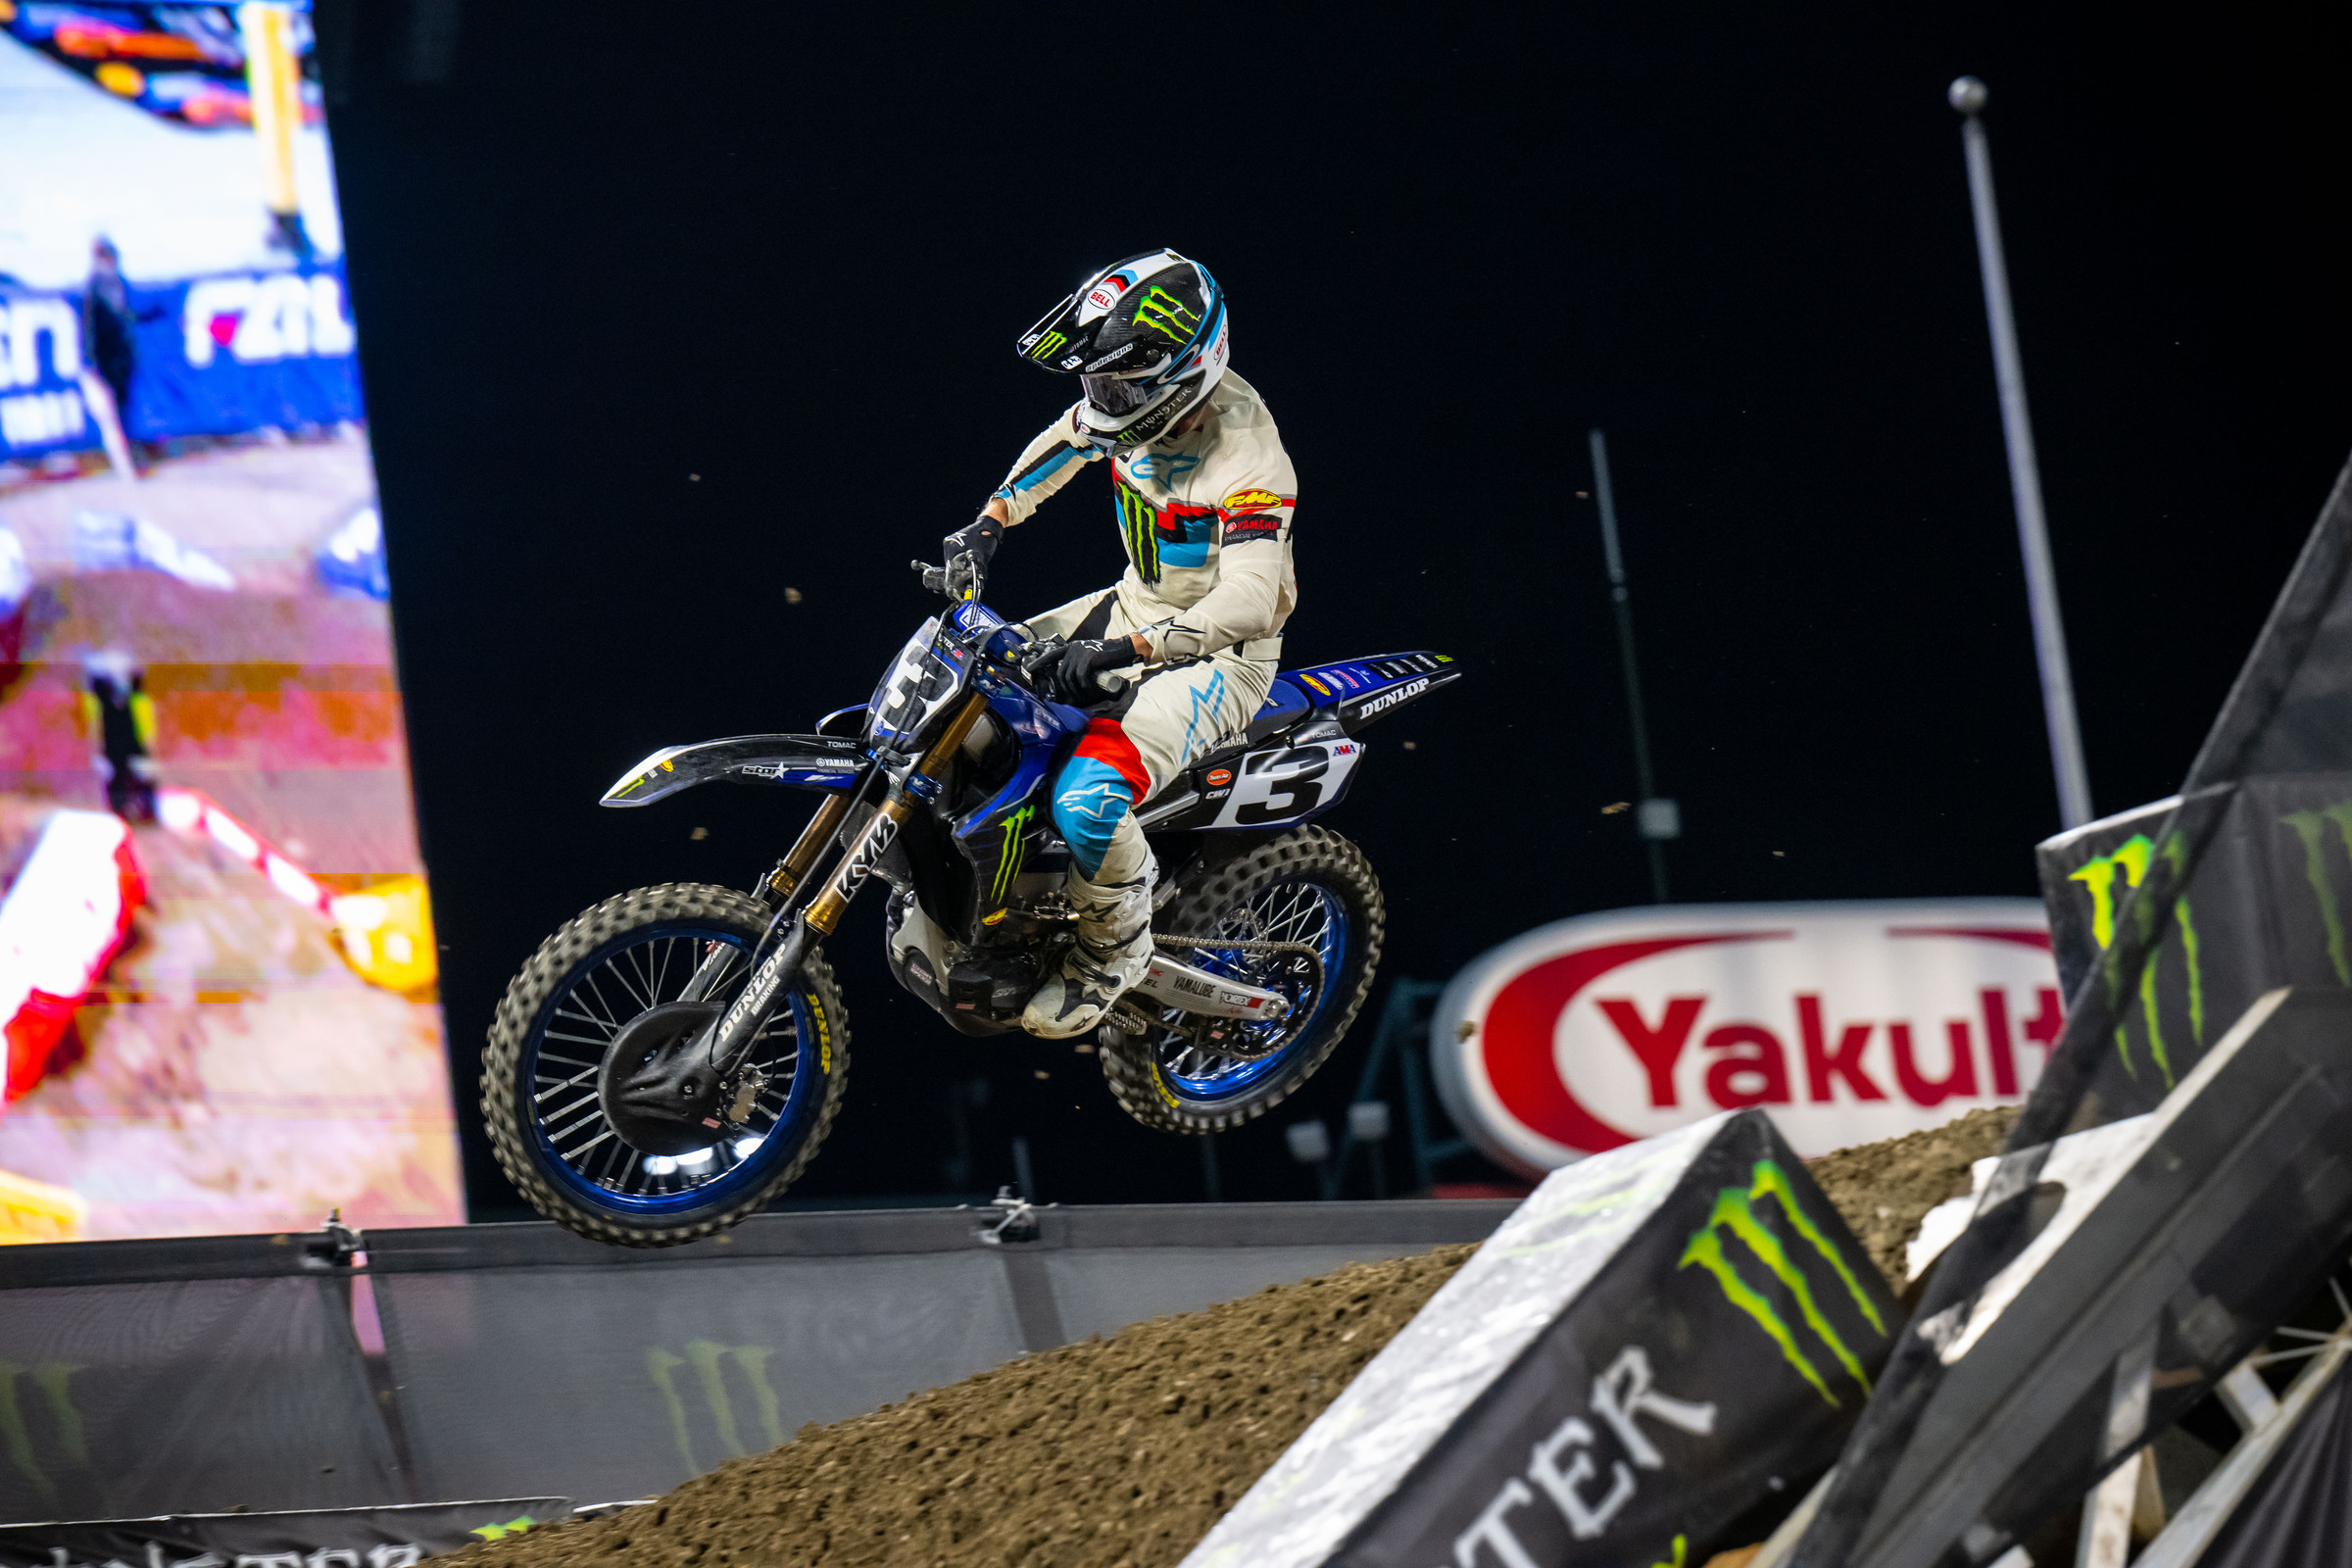 How to Stream and Watch 2022 Oakland Supercross on TV